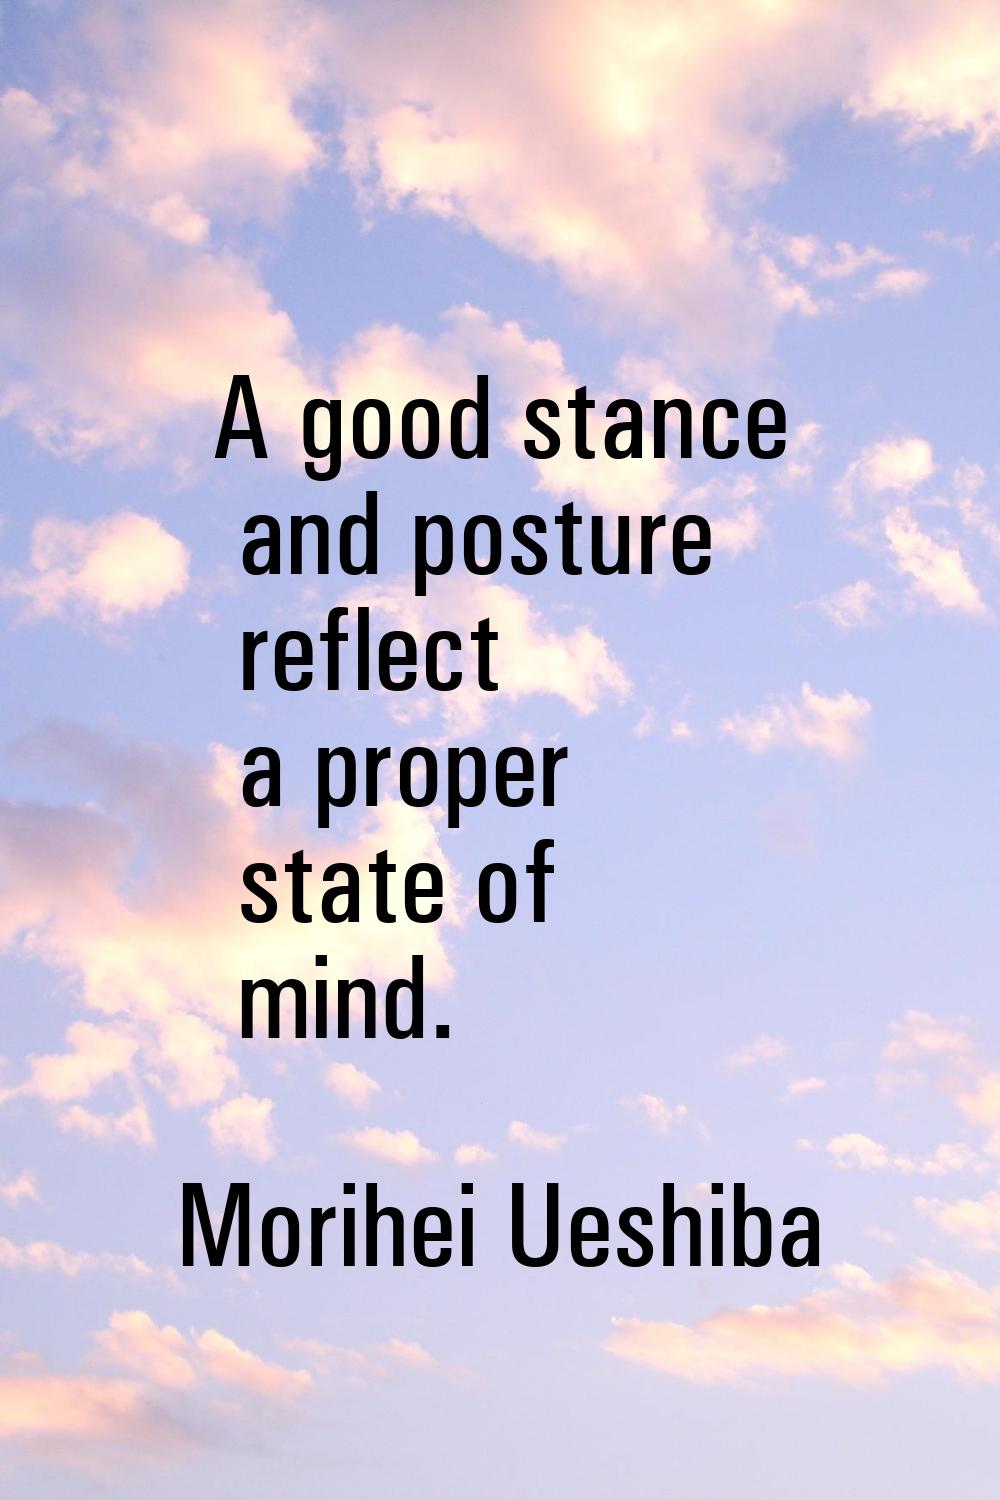 A good stance and posture reflect a proper state of mind.